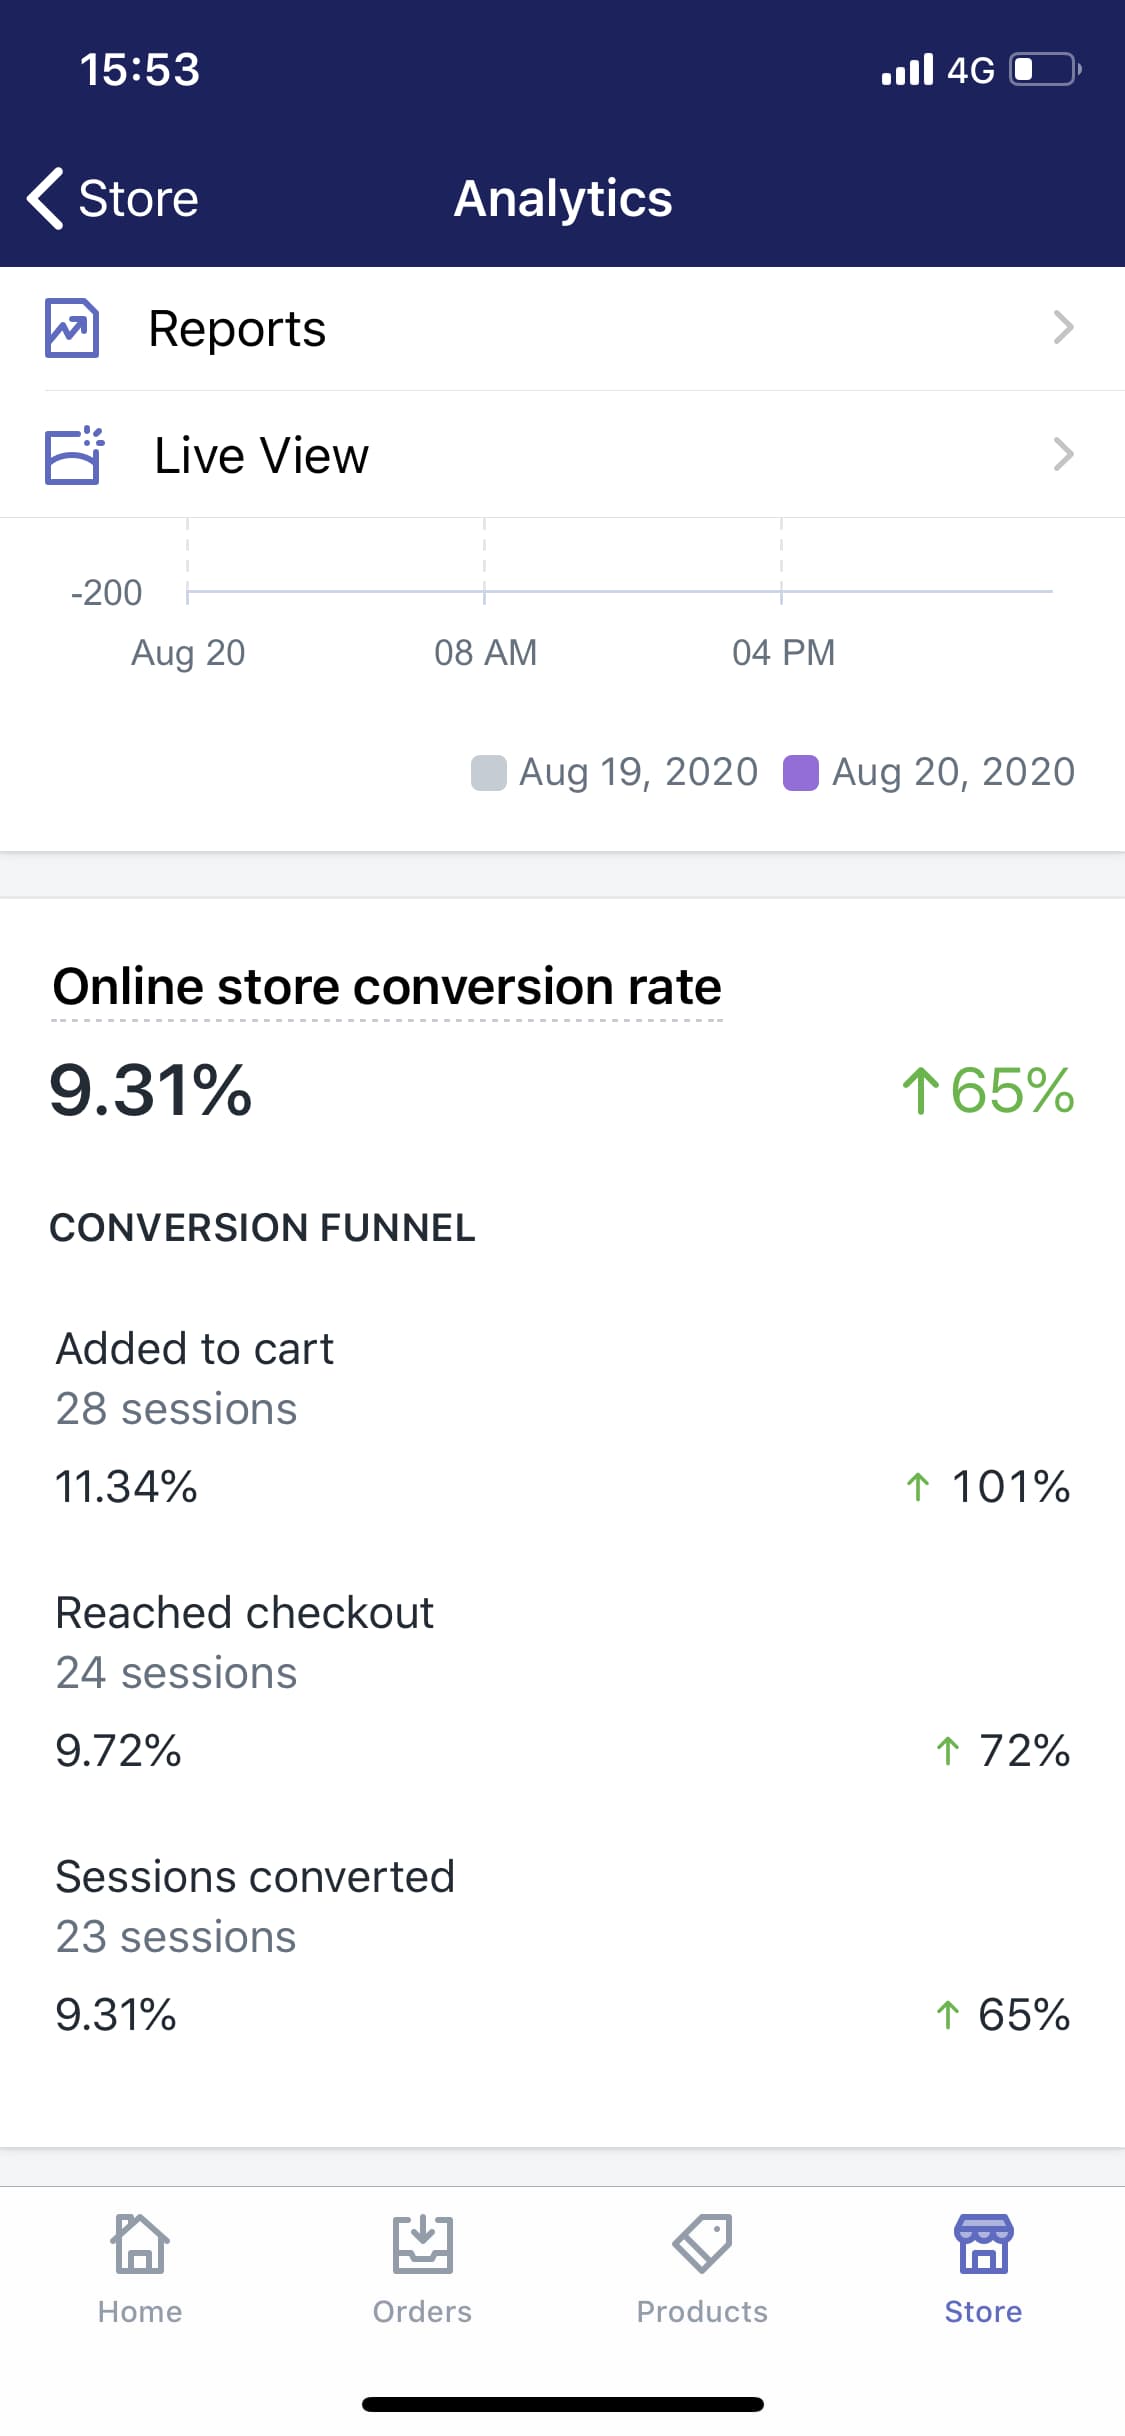 €100K in 3 months: Step-by-step Ecommerce strategy [Case Study] 4